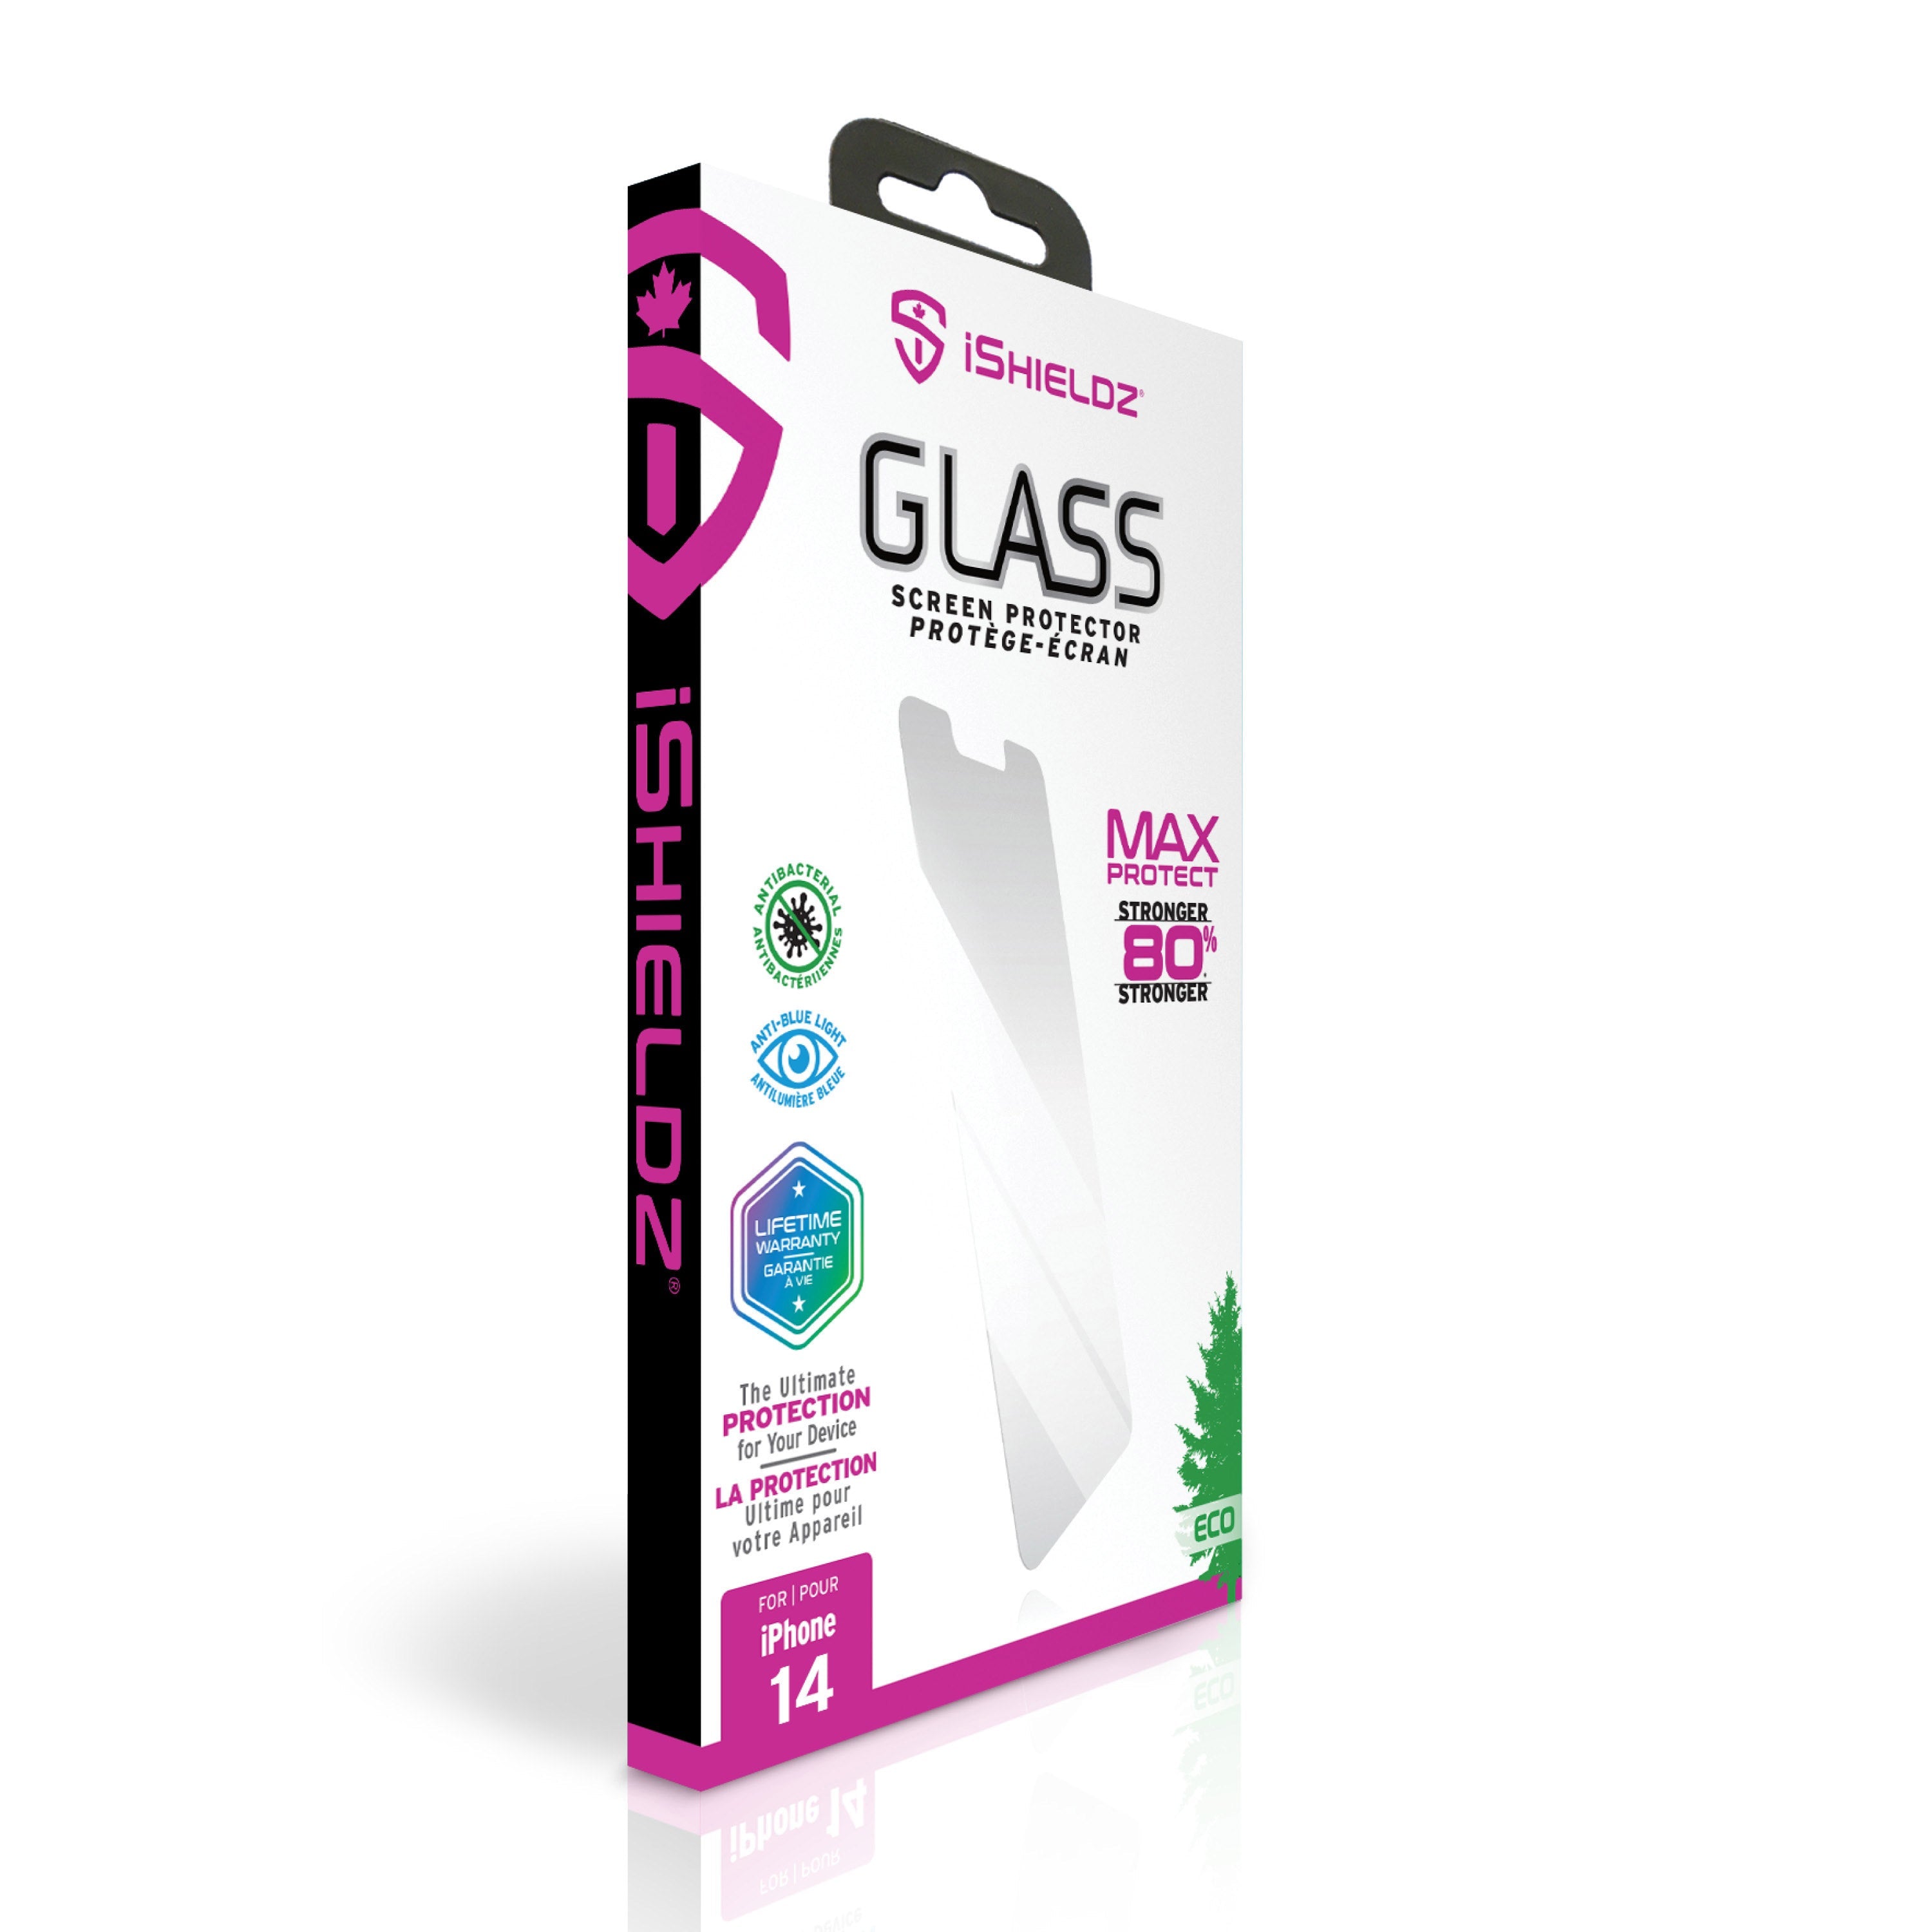 iShieldz MAX PROTECT Glass Screen Protector for Apple iPhone